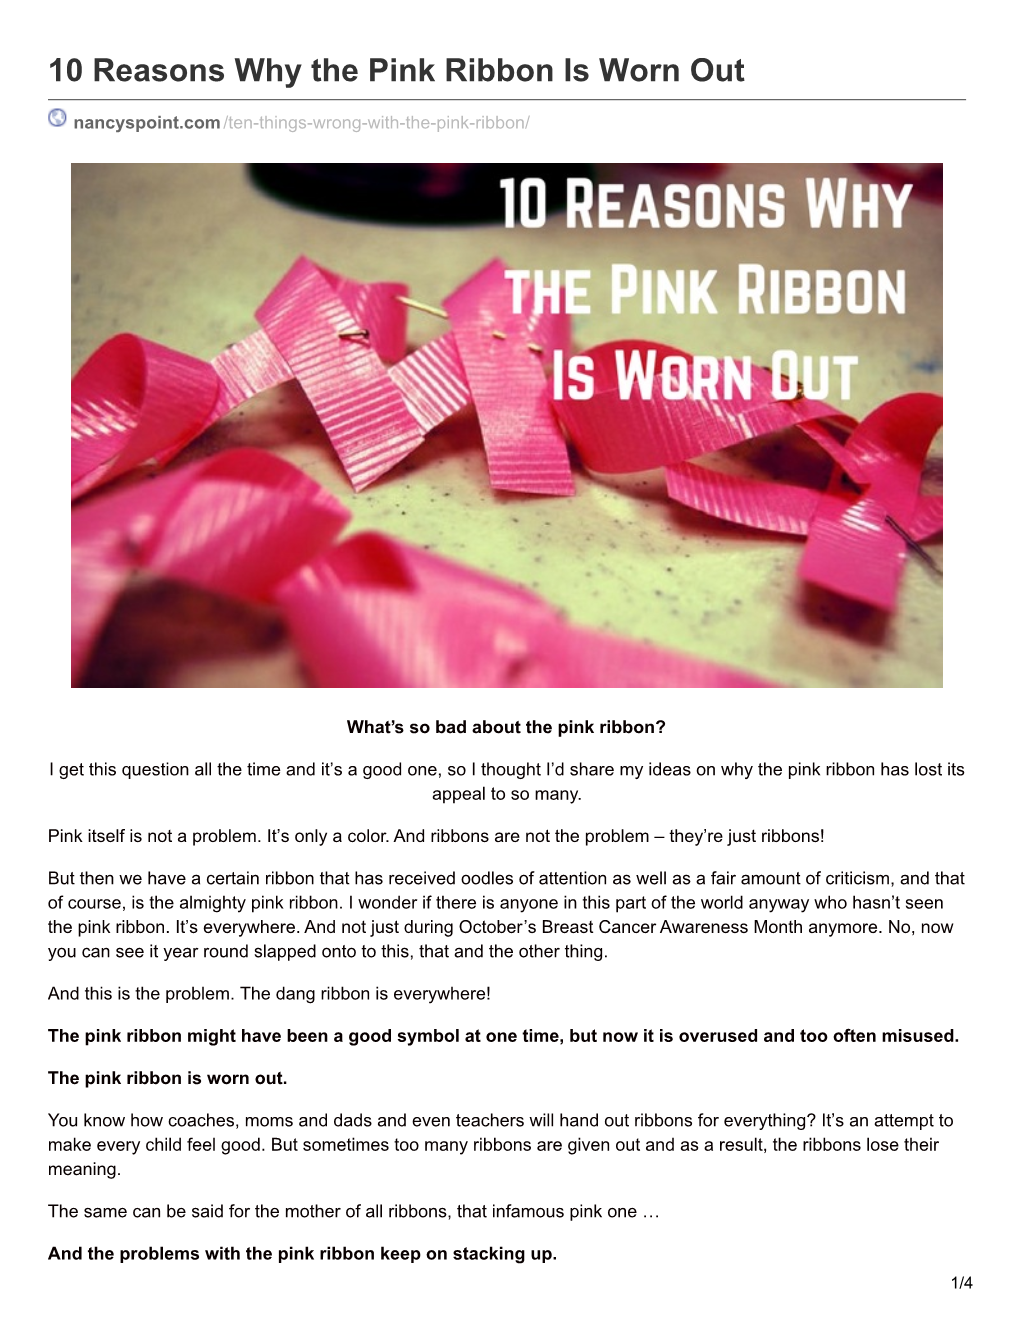 10 Reasons Why the Pink Ribbon Is Worn Out